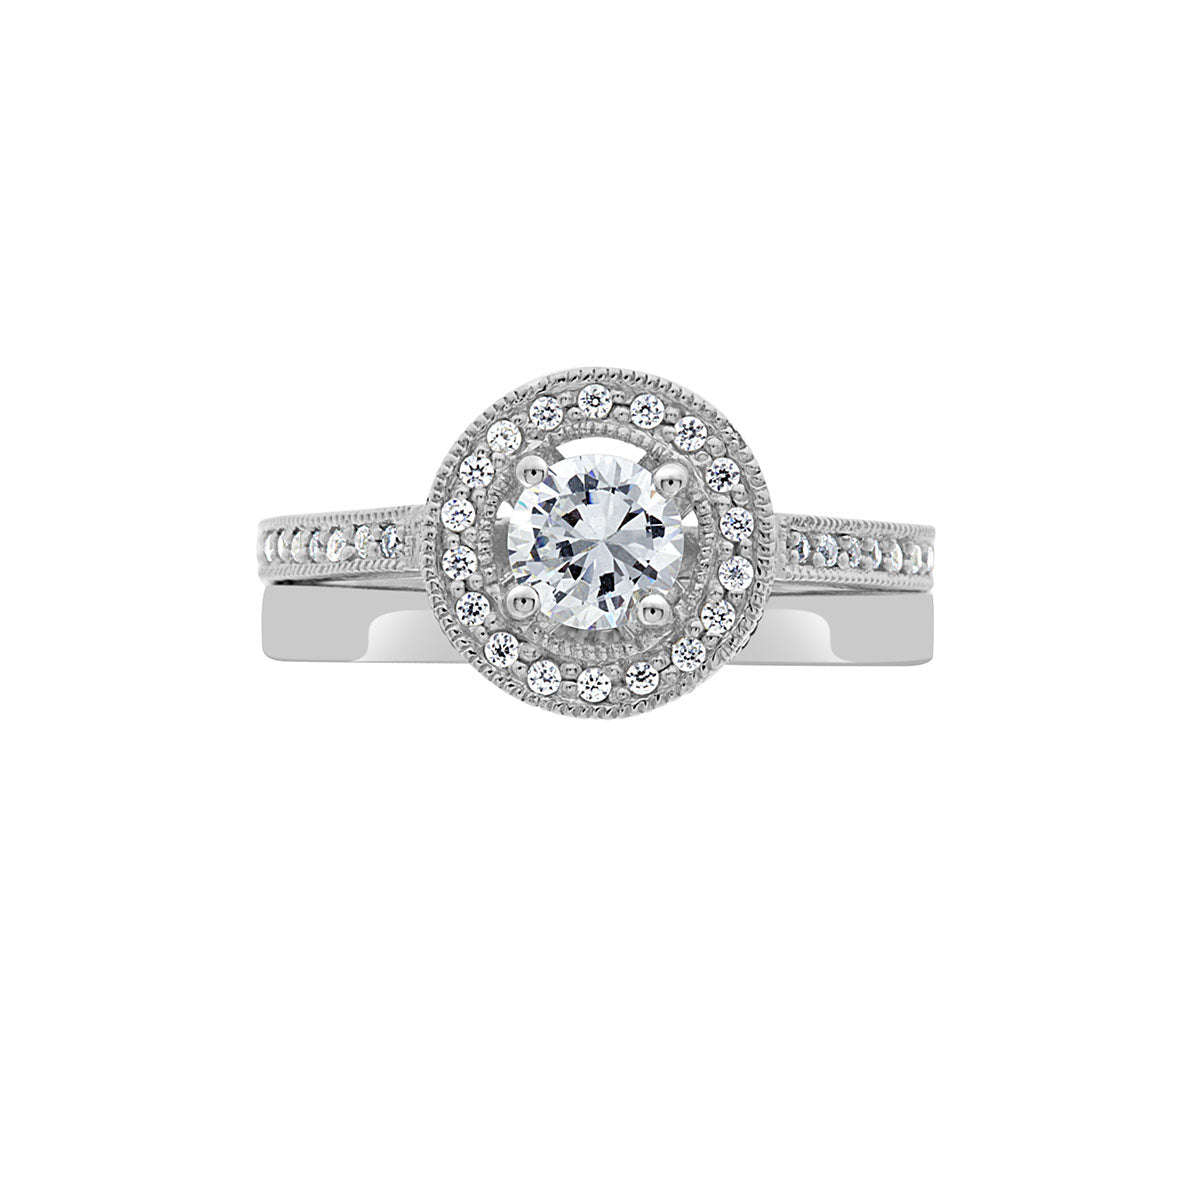 Vintage Style Ring in White Gold laying horizontal, with a matching plain white wedding ring